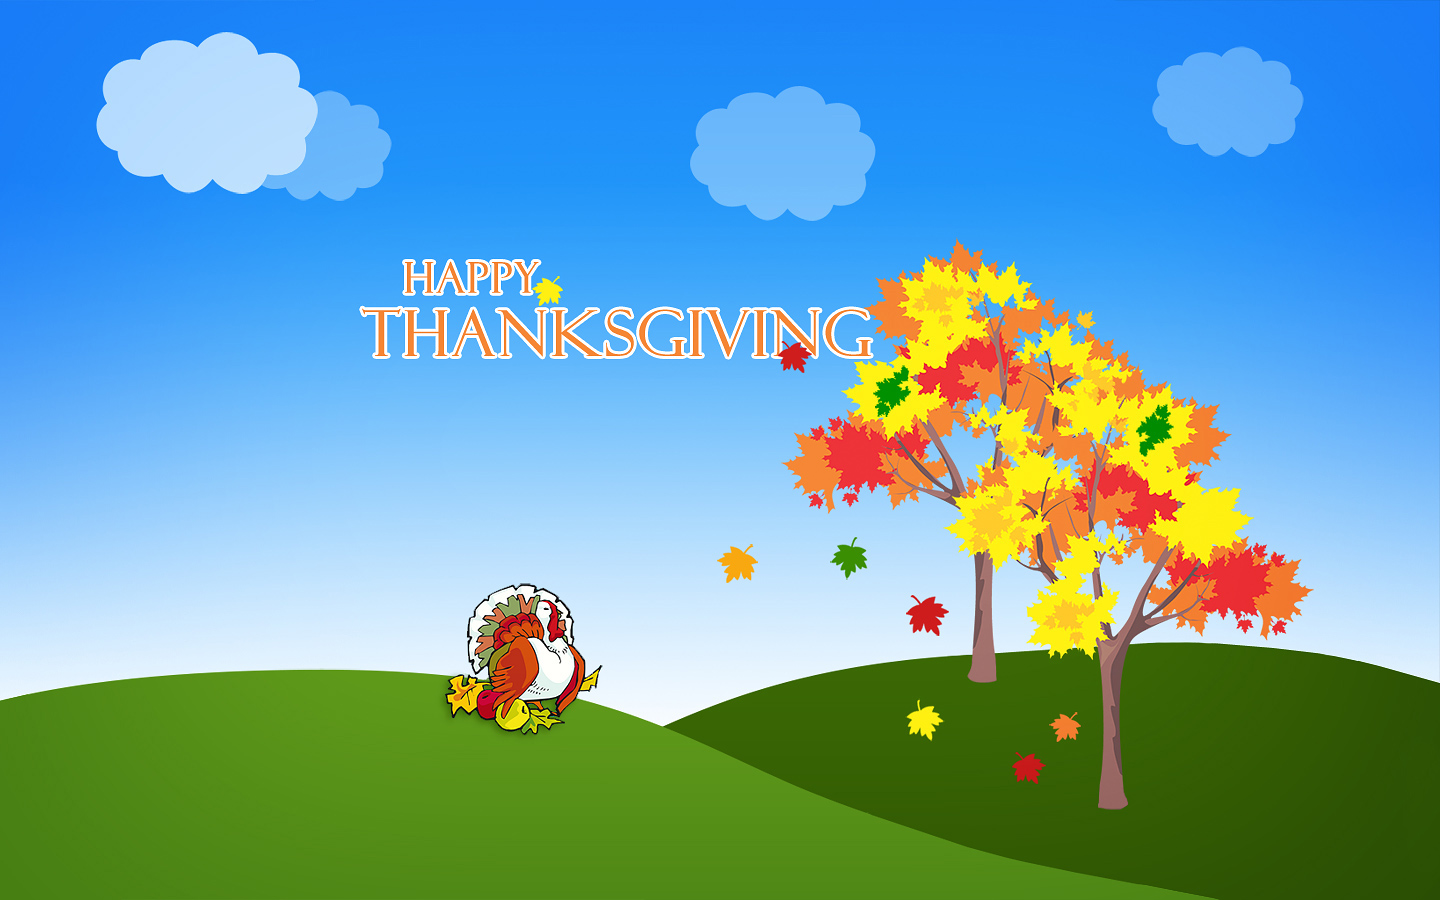 Cute Thanksgiving Desktop Background Image Amp Pictures